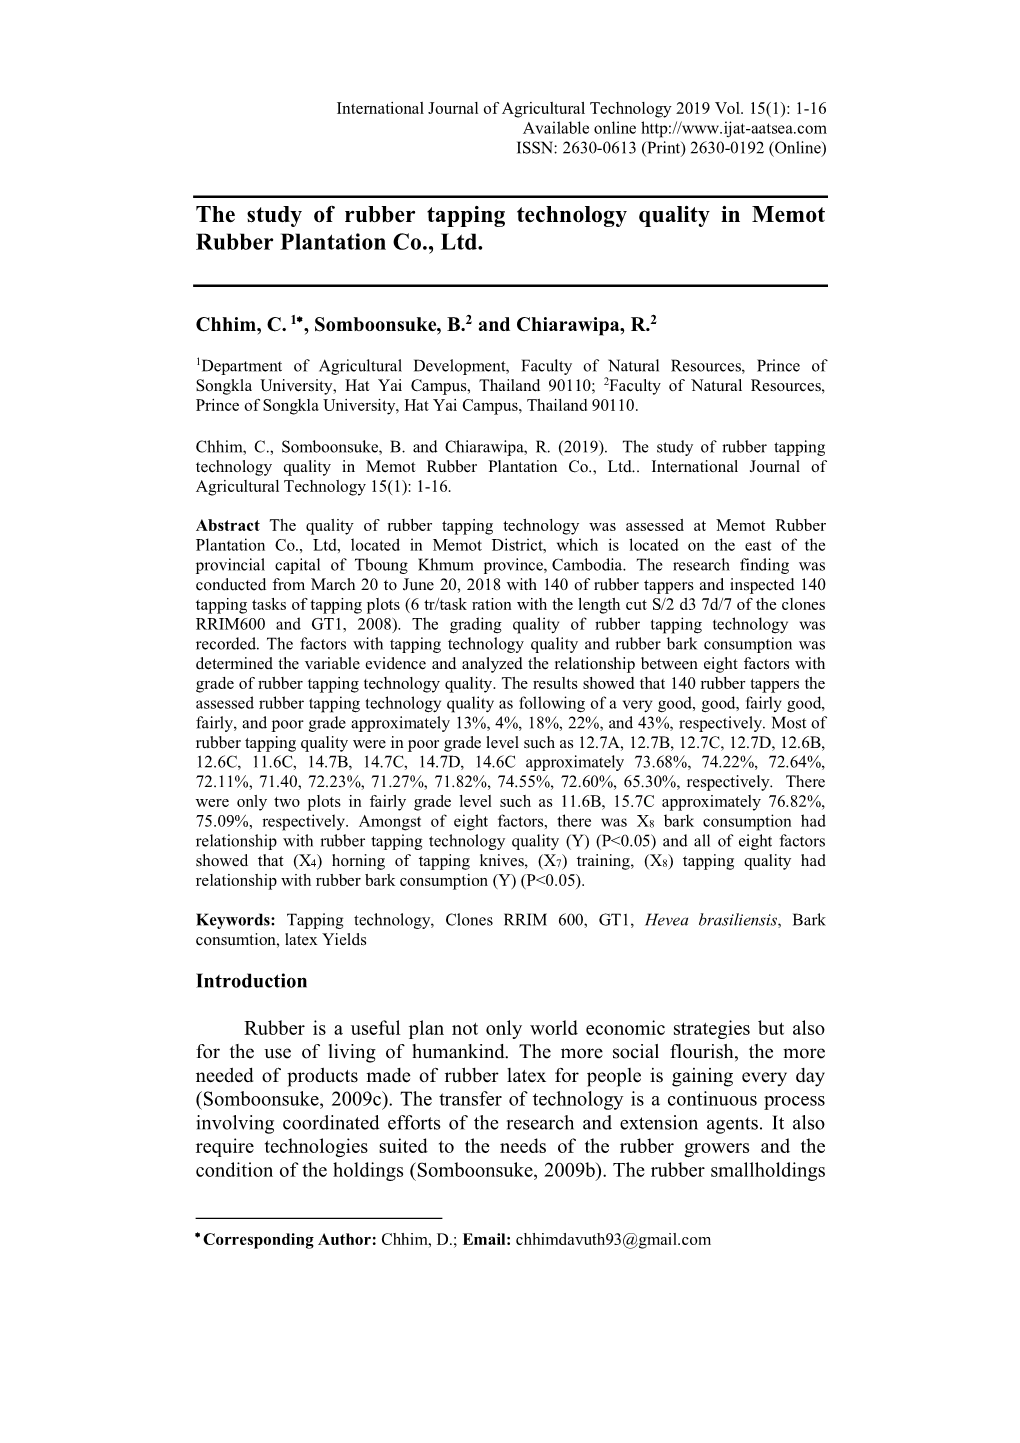 The Study of Rubber Tapping Technology Quality in Memot Rubber Plantation Co., Ltd